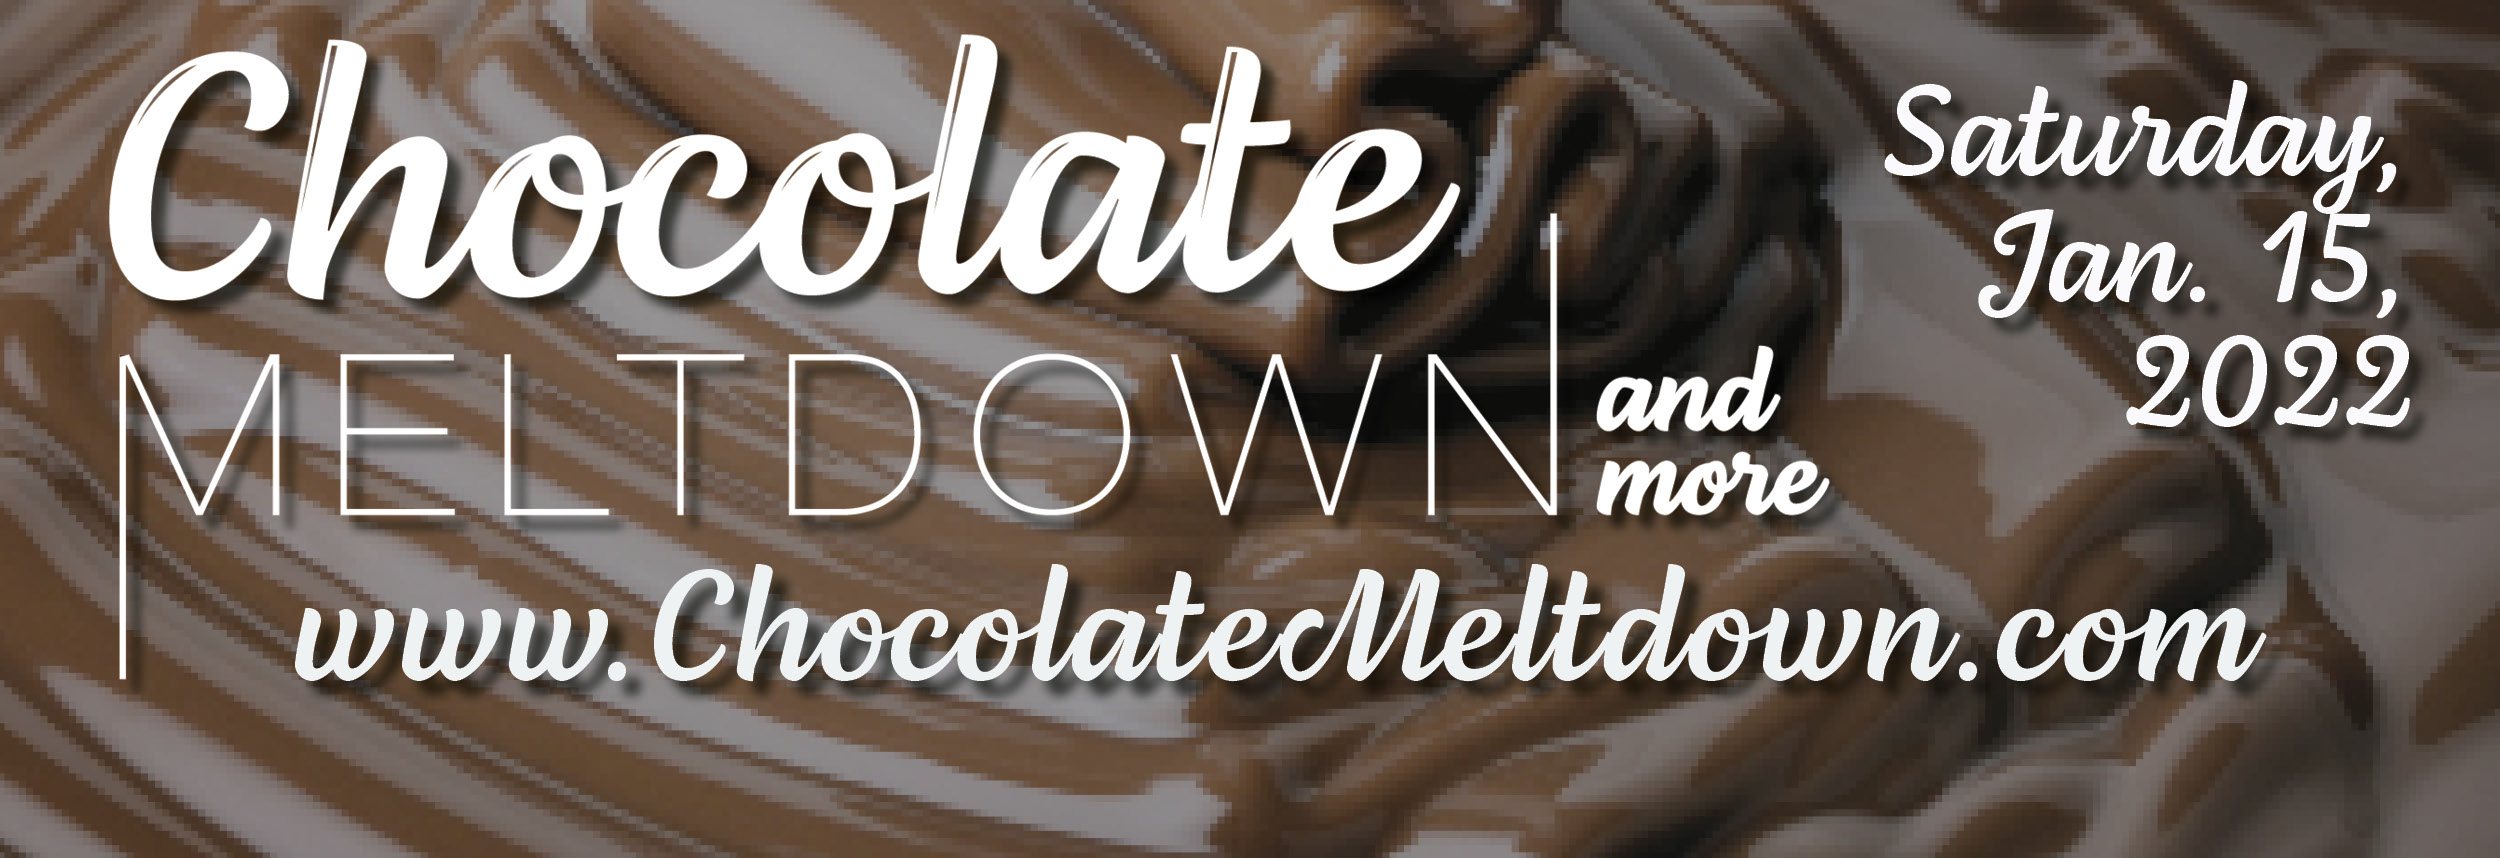 Chocolate Meltdown is Sat Jan 15 from 1-7 PM